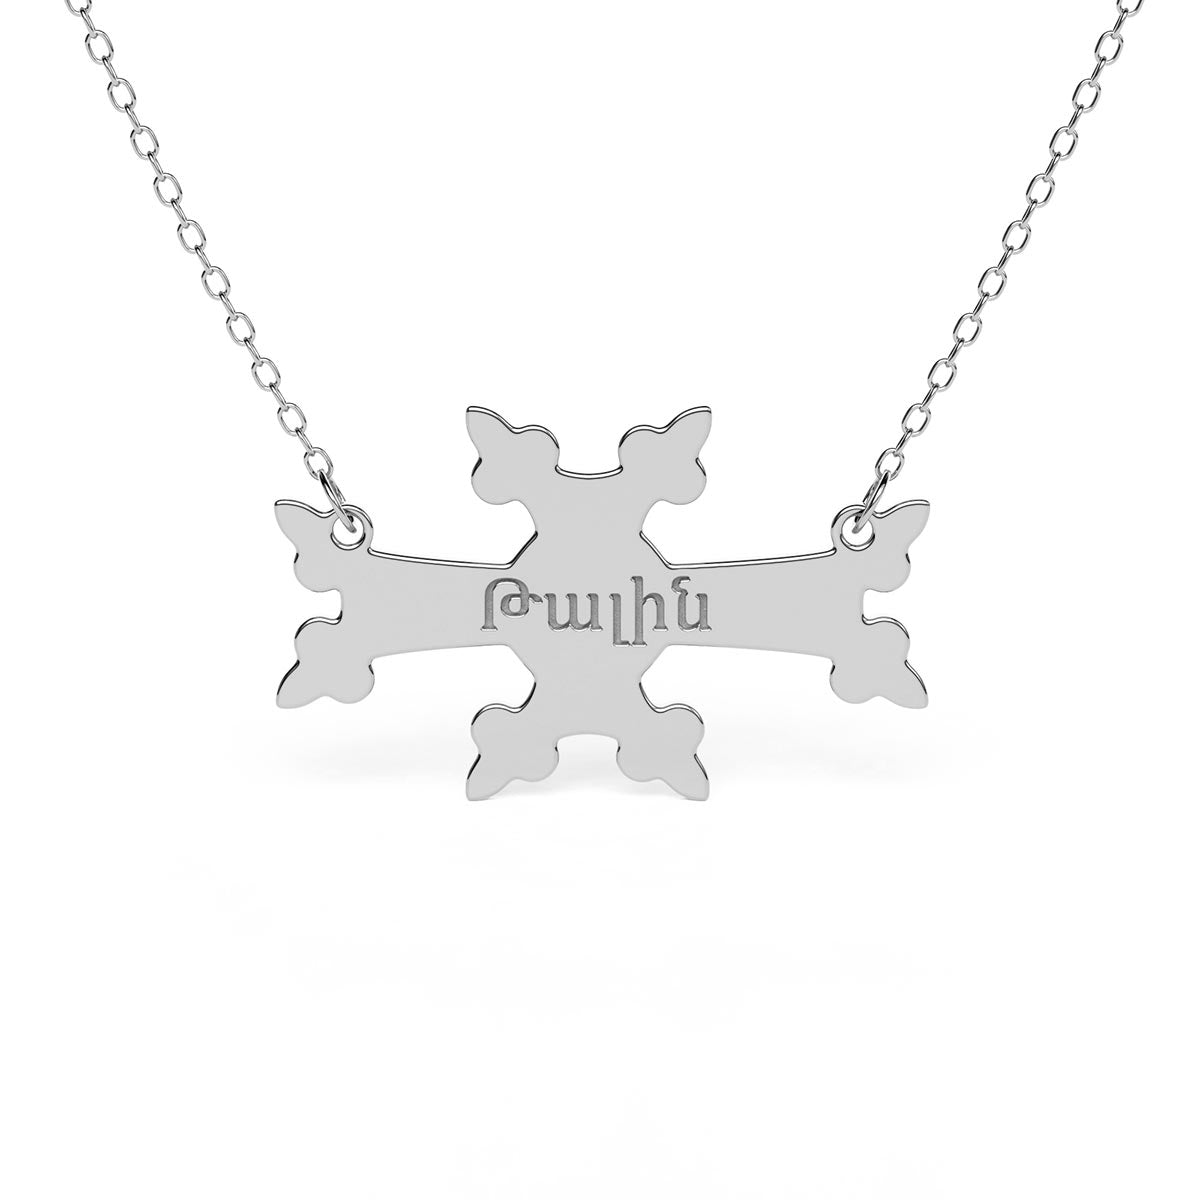 Sideways Cross Necklace With Armenian Engraving